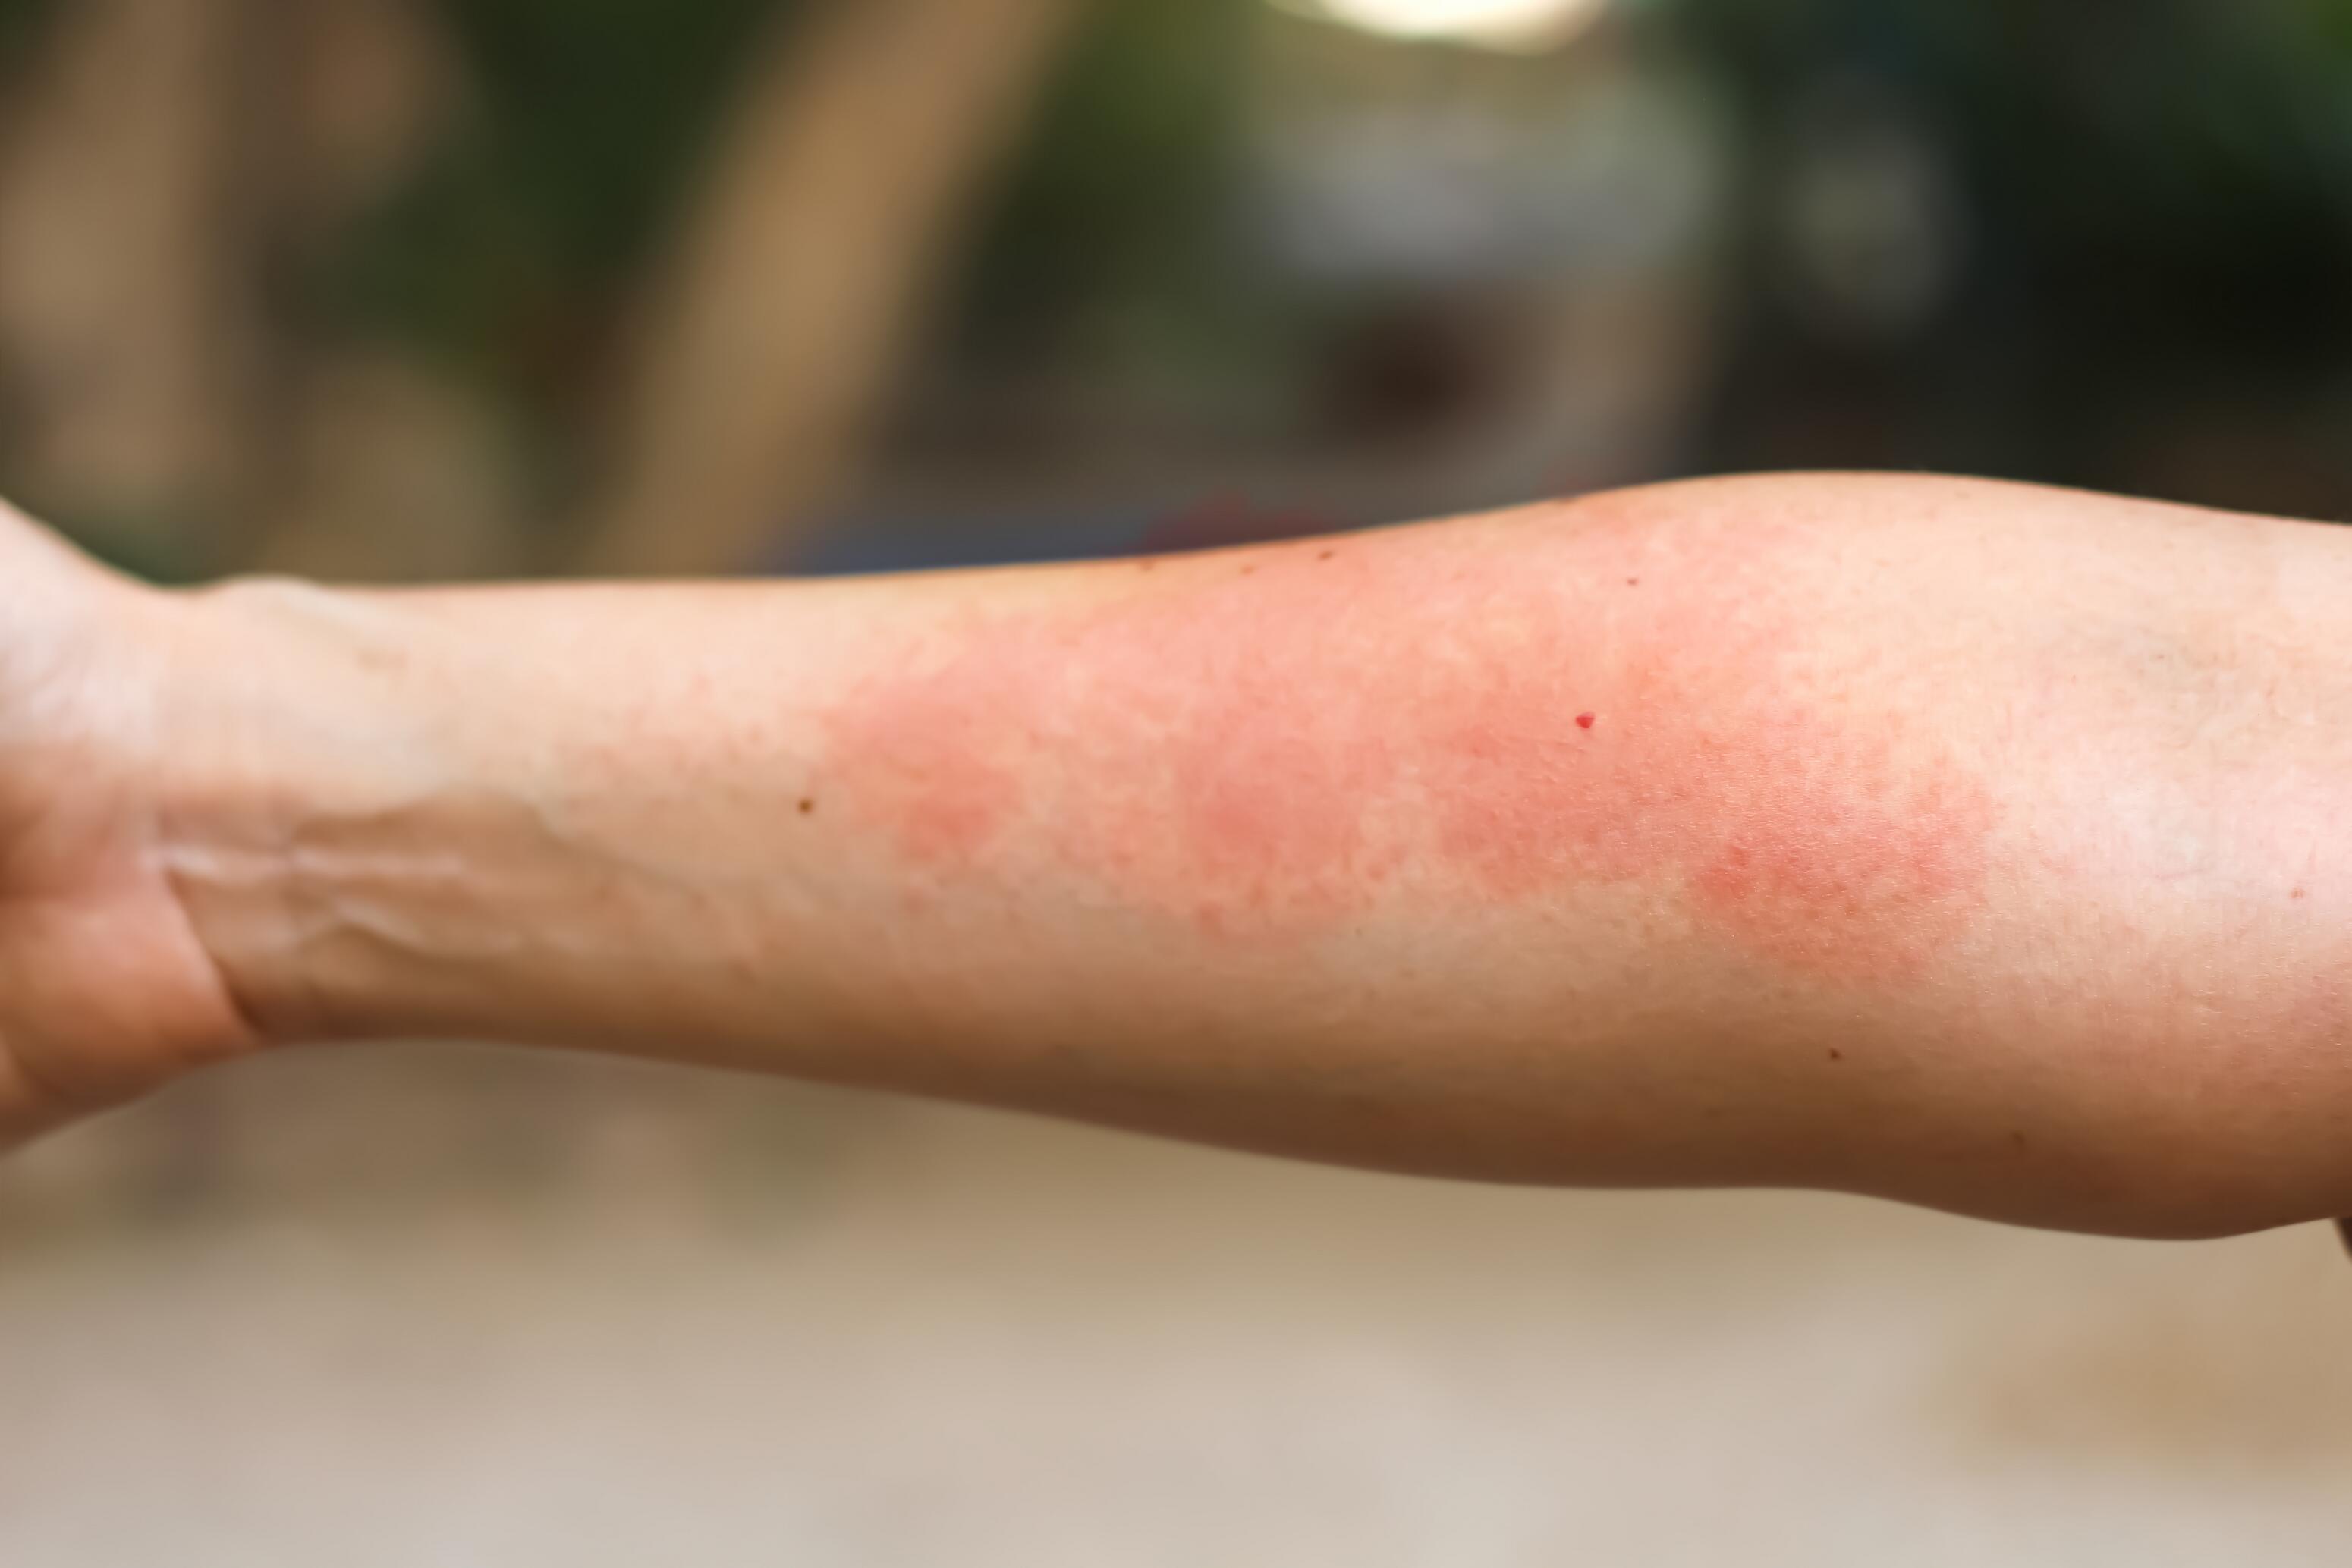 Arms with red eczema patches